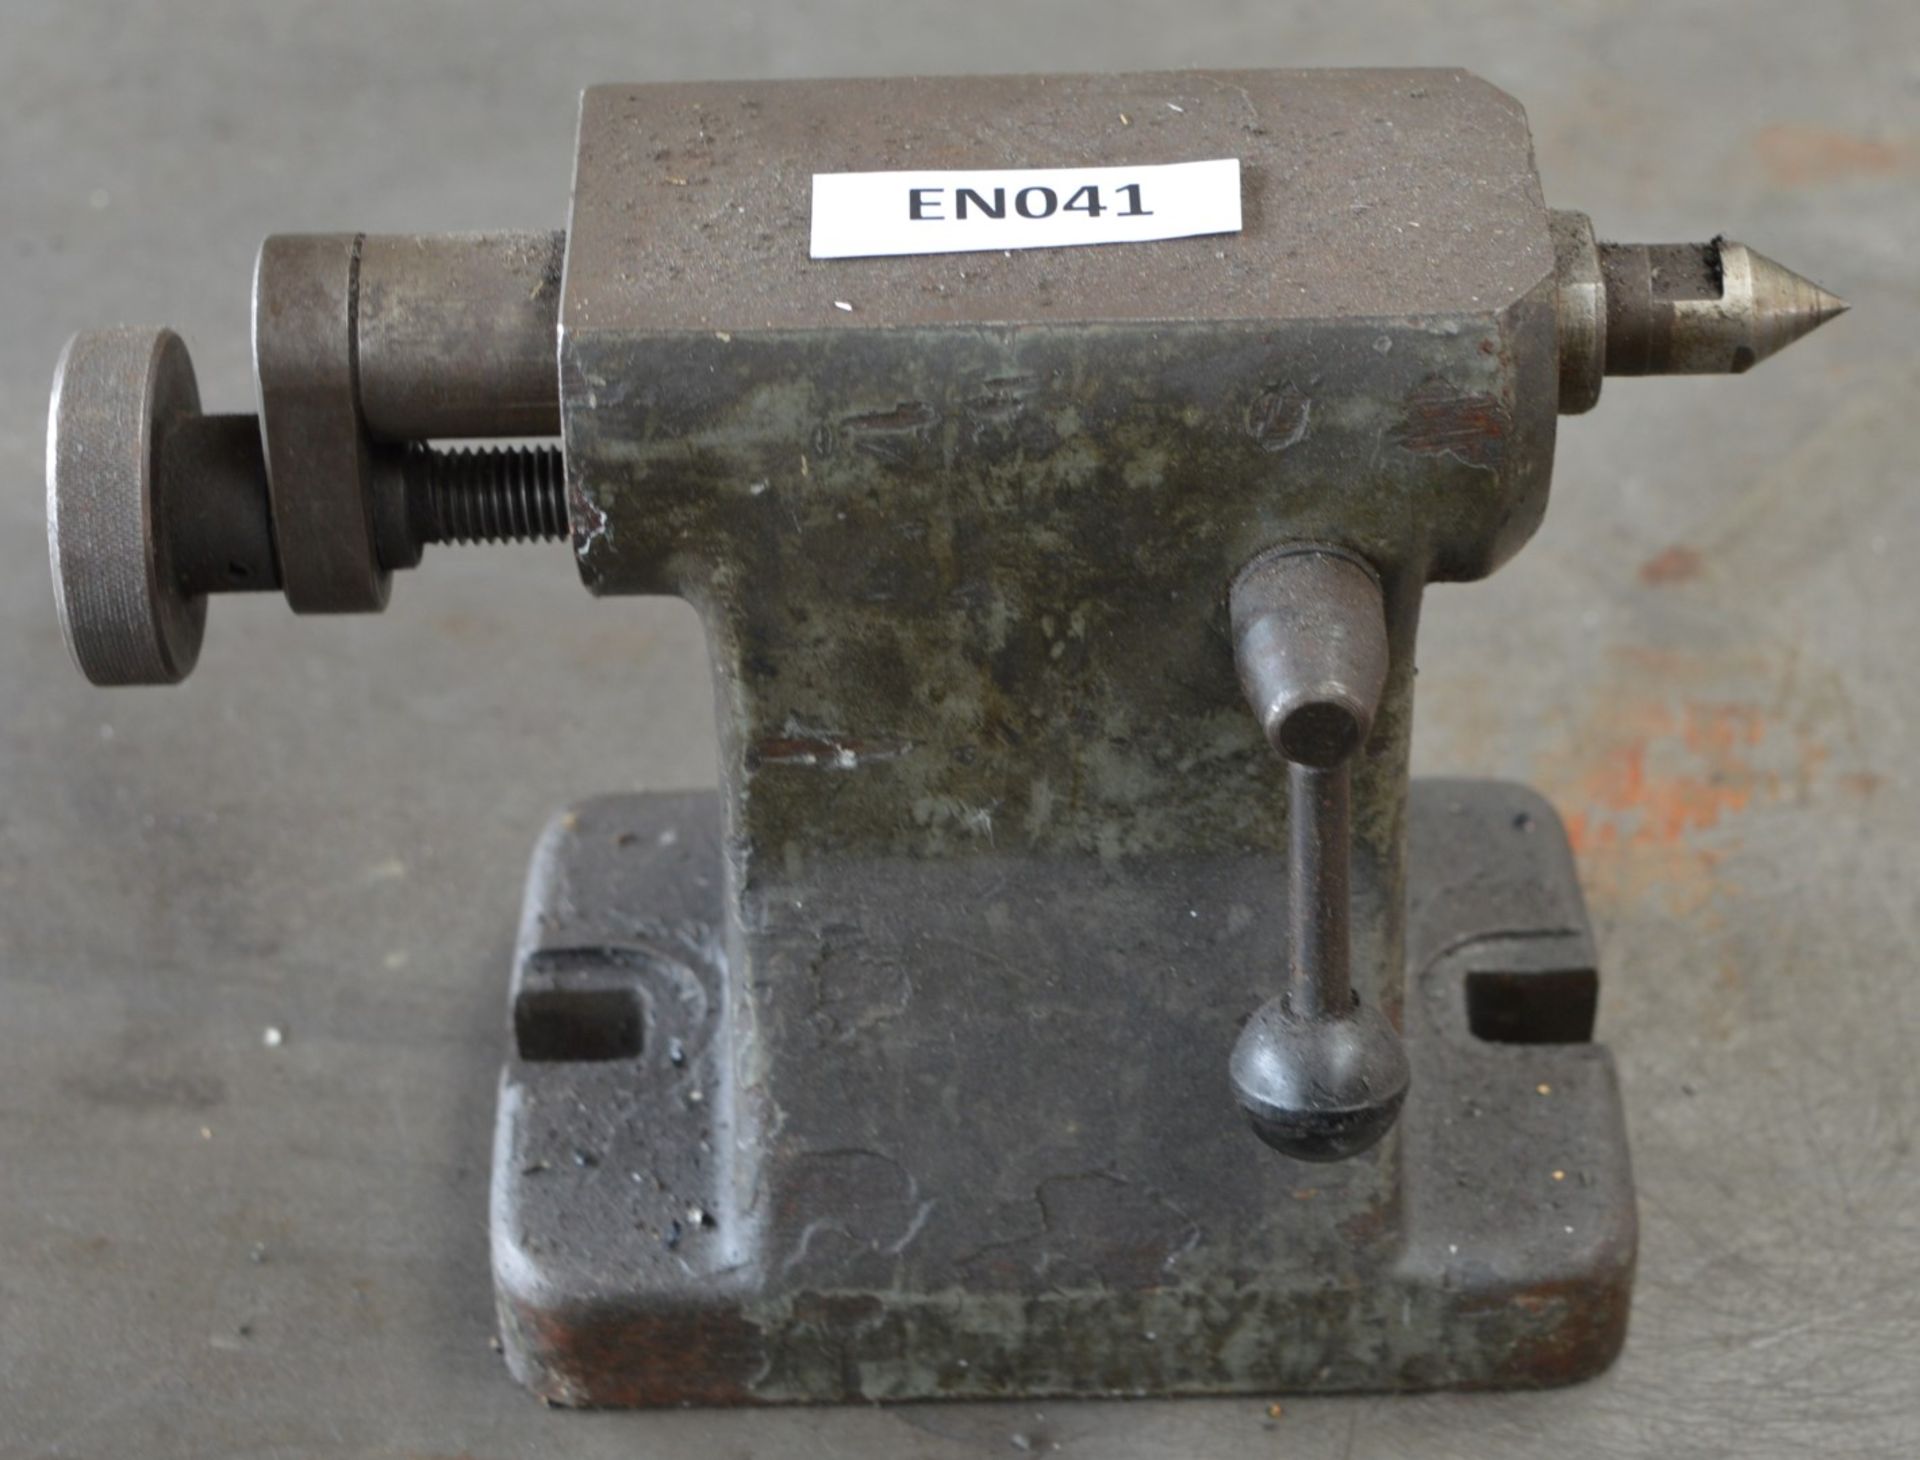 1 x Bench Mounted Engineers Lathe - Vintage Heady Duty Lathe Suitable For Mounting on - Image 2 of 4